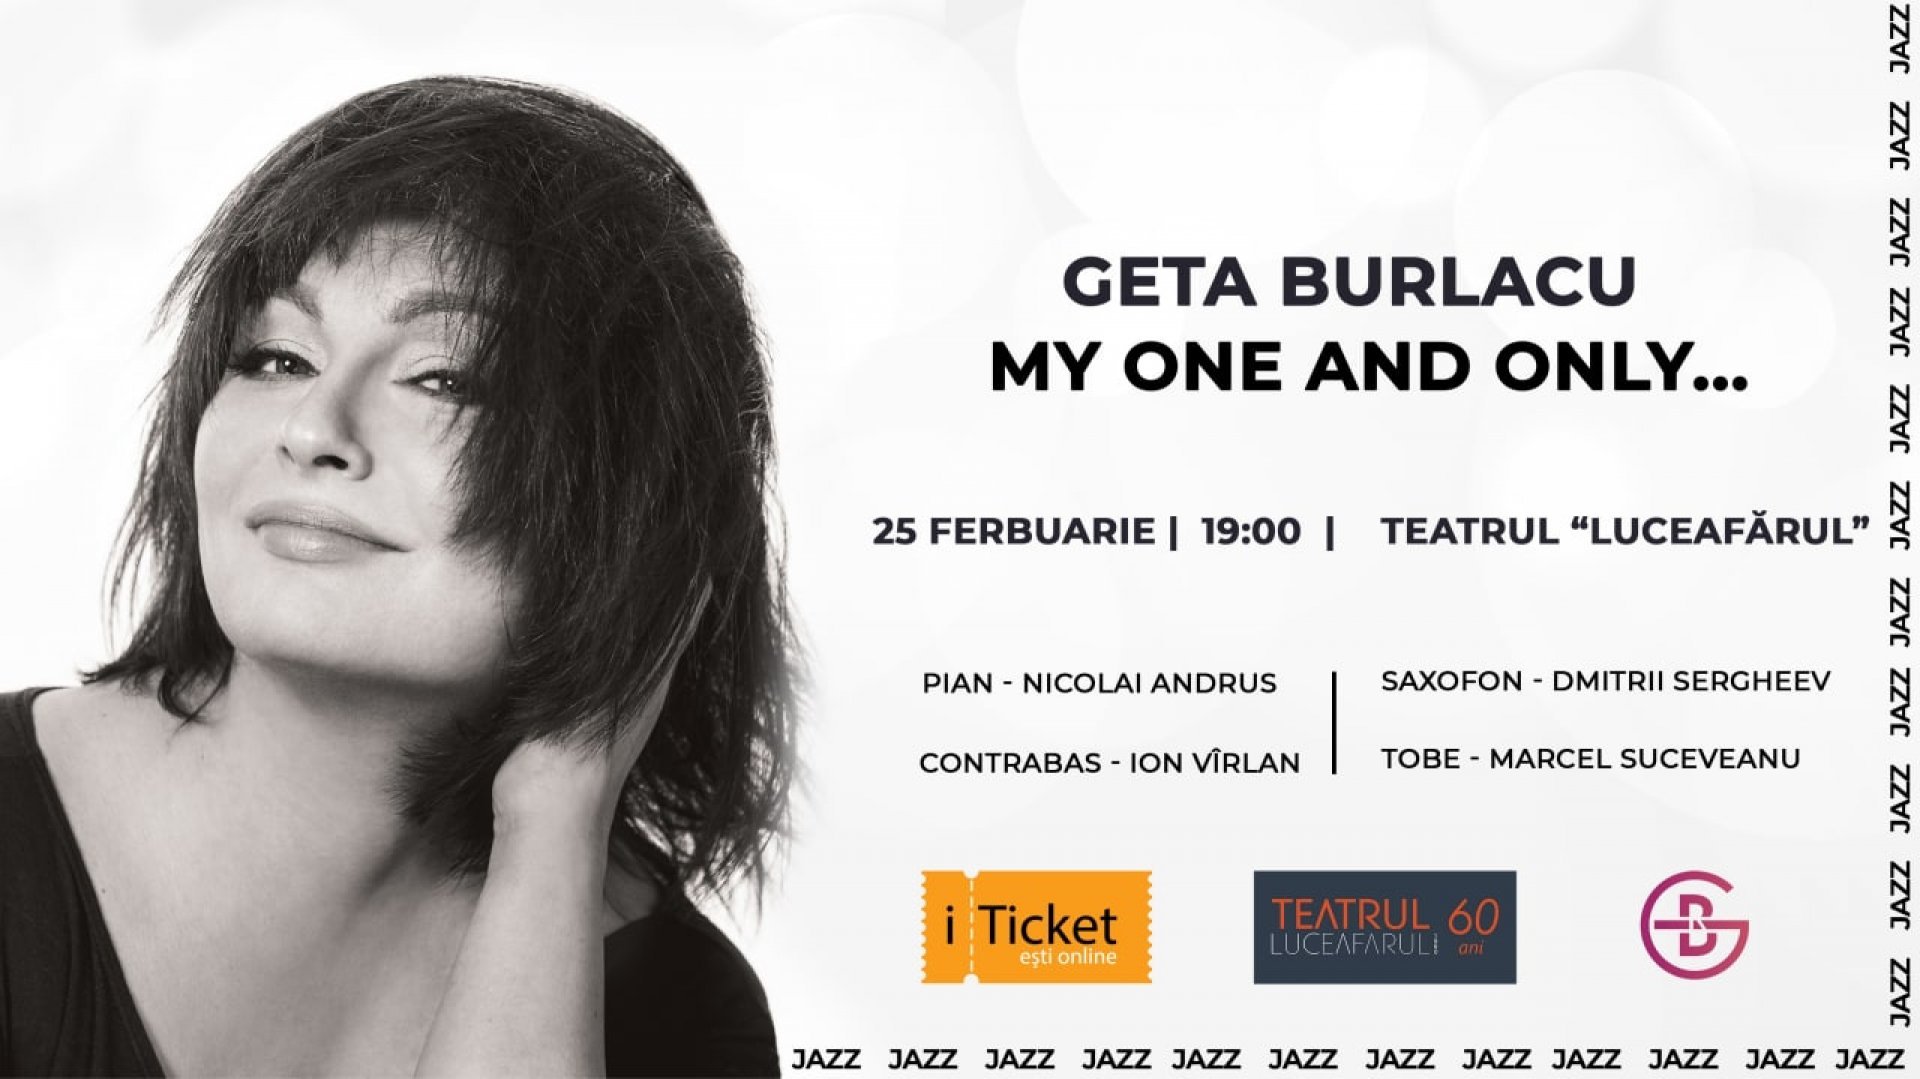 Geta Burlacu - “My one and only...” - JAZZ LIVE